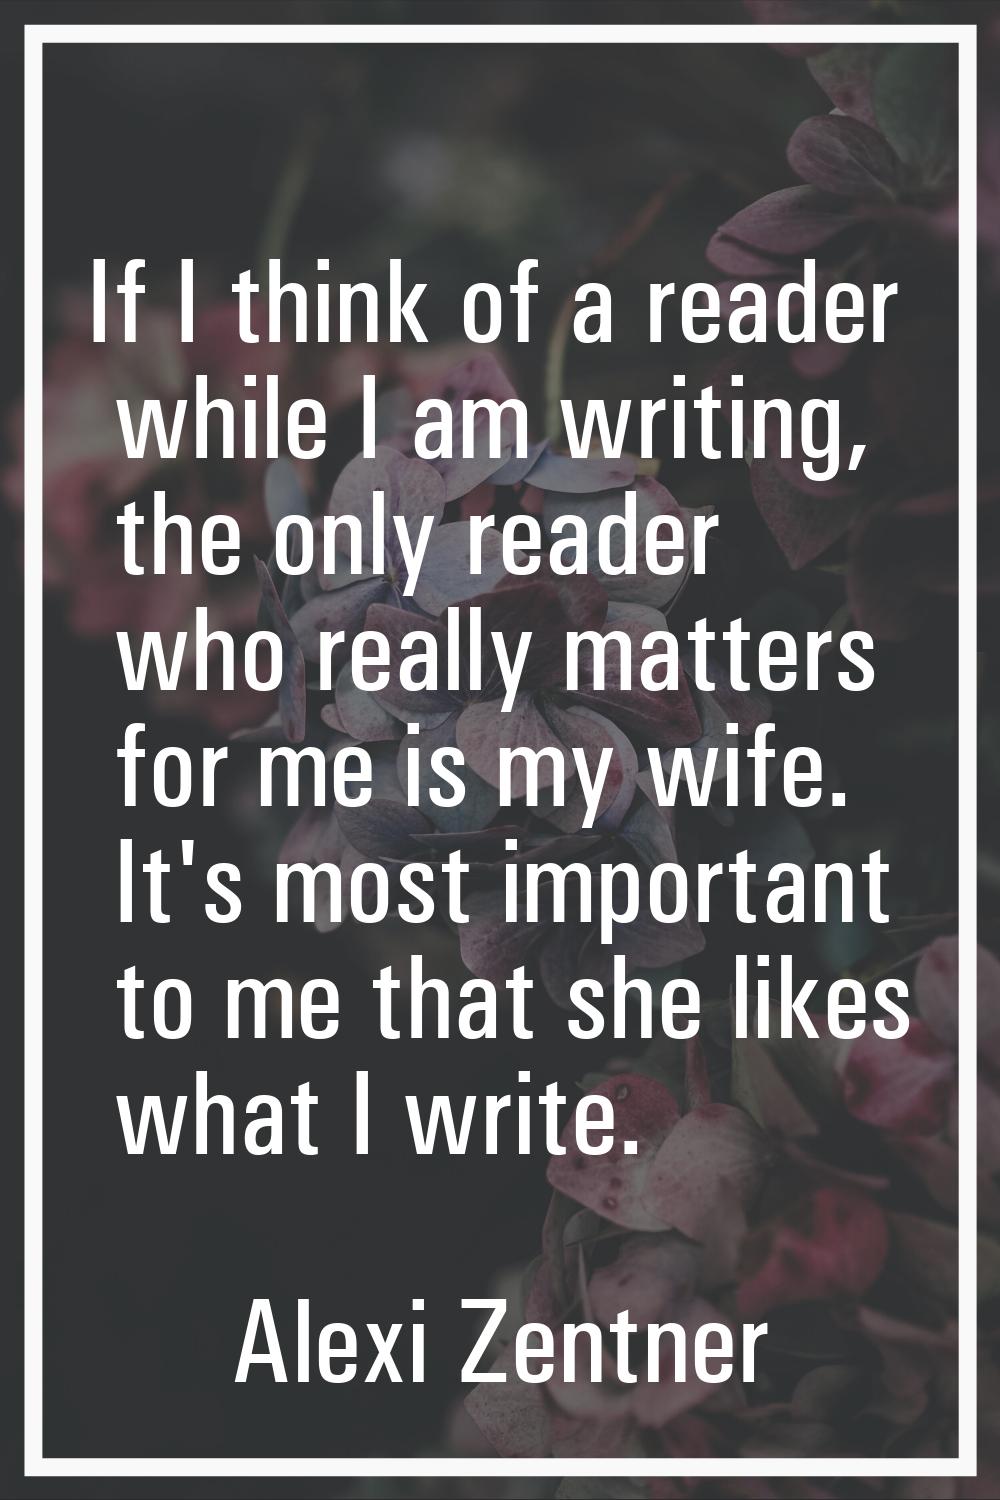 If I think of a reader while I am writing, the only reader who really matters for me is my wife. It